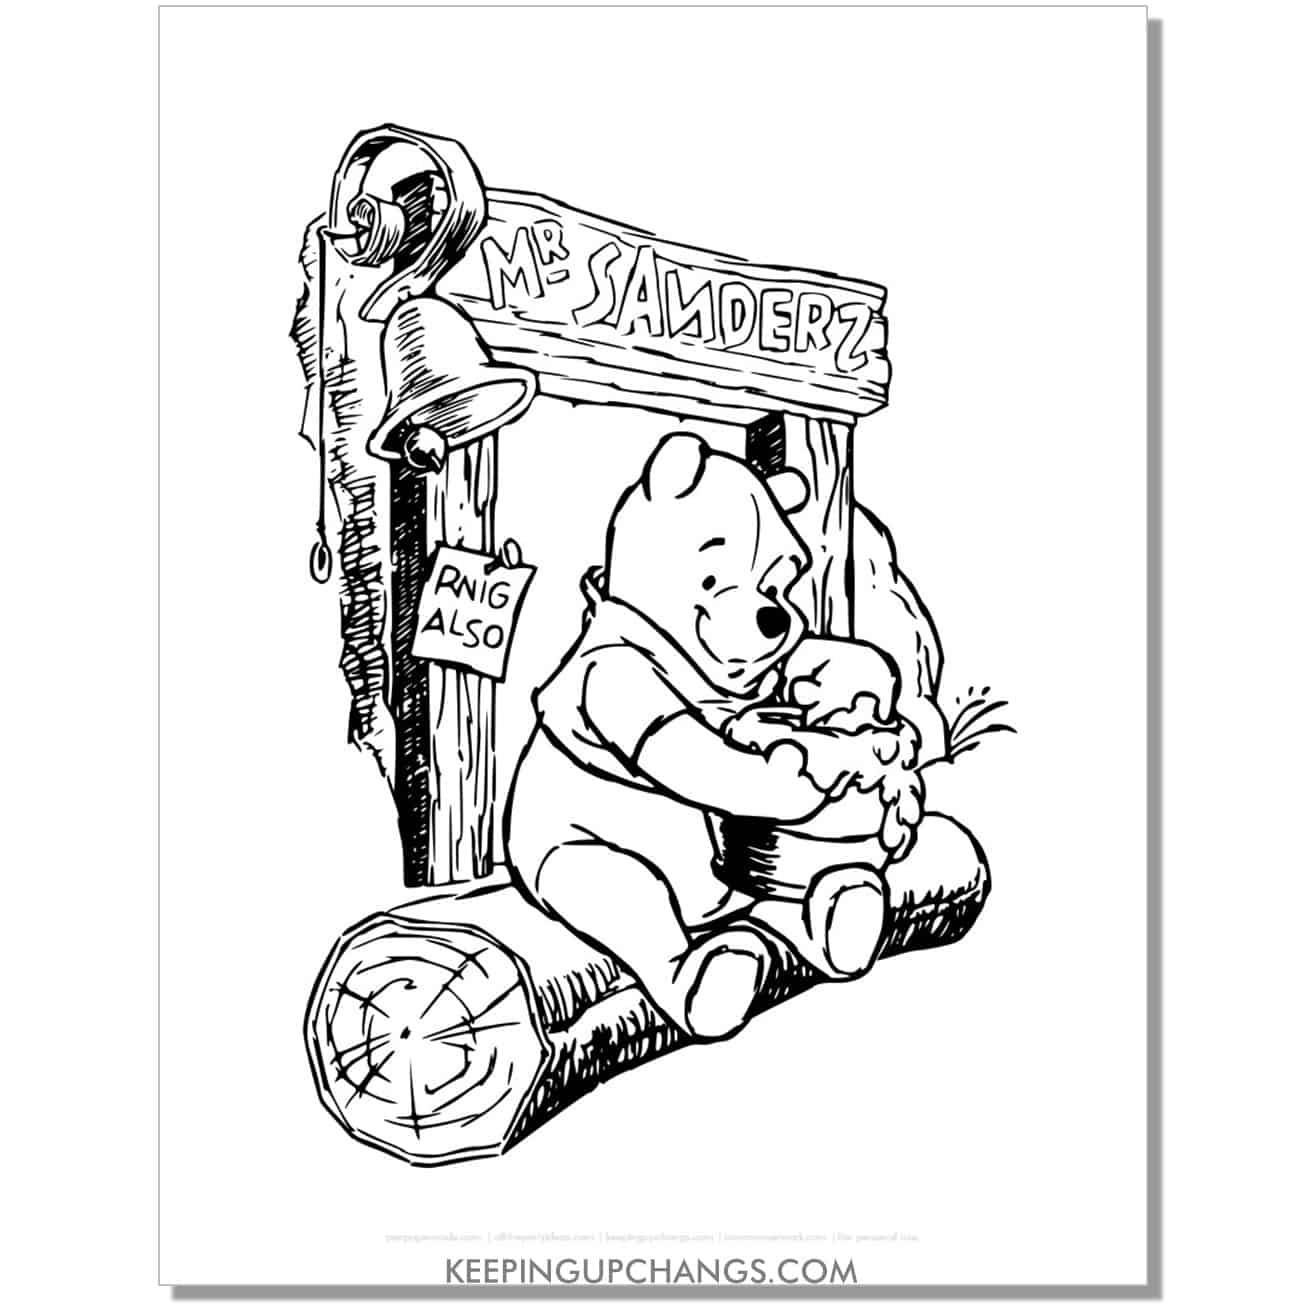 winnie the pooh eating honey at mr sanders stand coloring page, sheet.